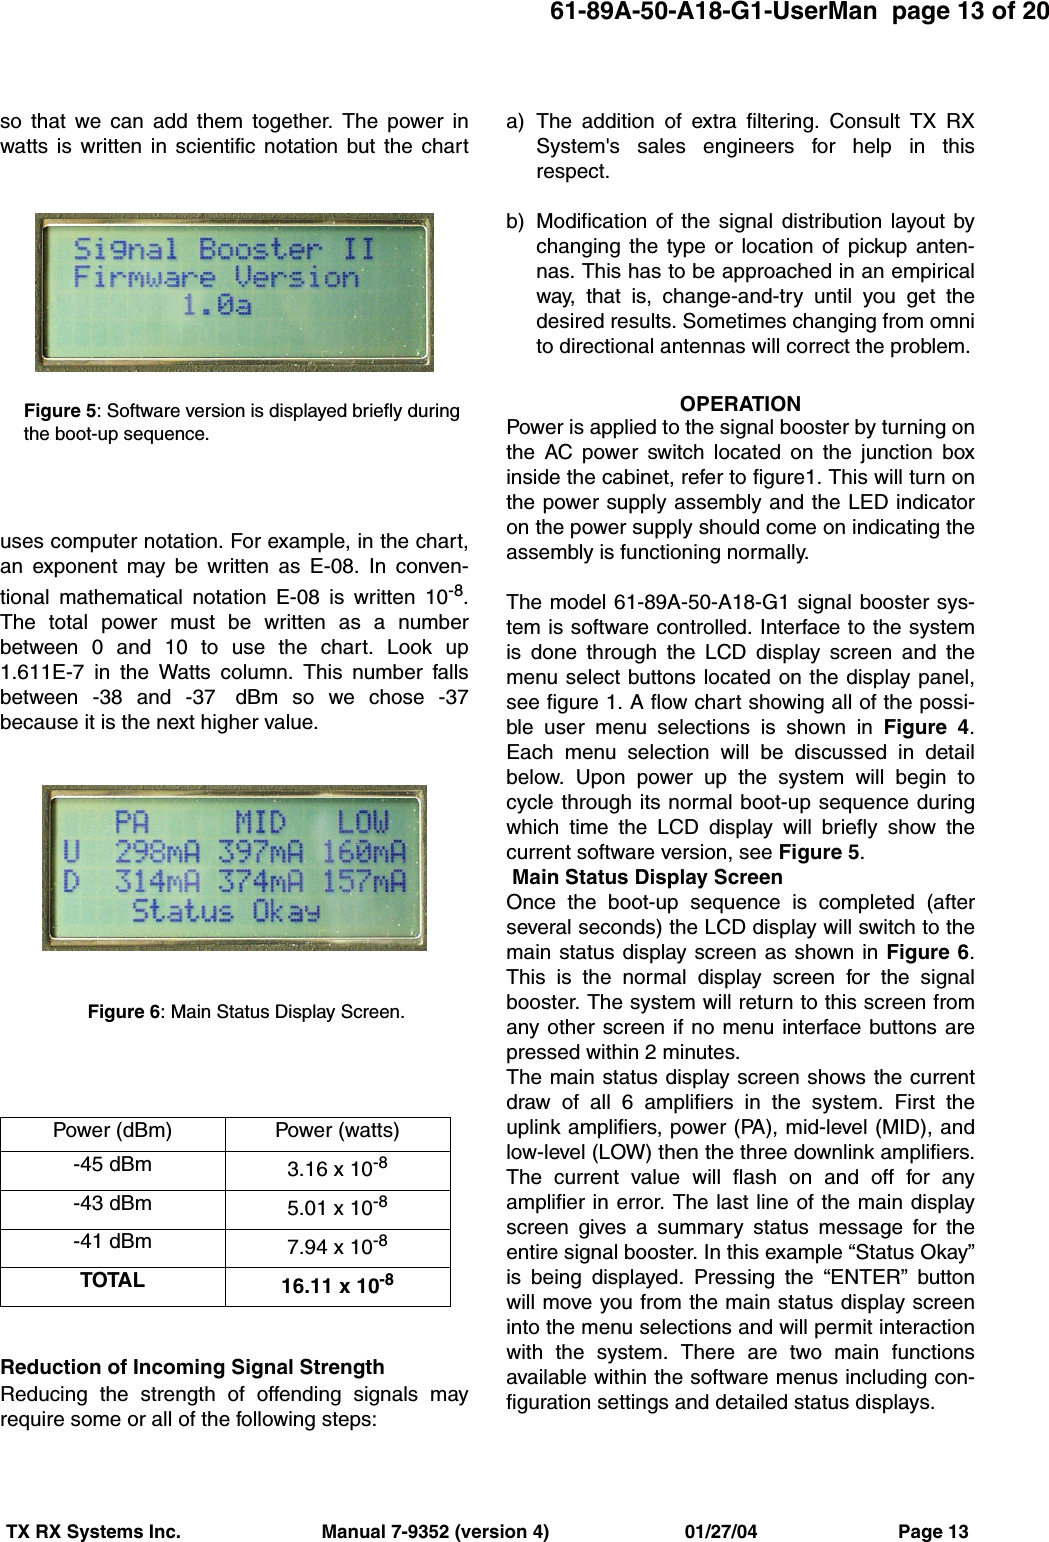 61-89A-50-A18-G1-UserMan  page 13 of 20TX RX Systems Inc.                           Manual 7-9352 (version 4)                          01/27/04                           Page 13so that we can add them together. The power inwatts is written in scientific notation but the chartuses computer notation. For example, in the chart,an exponent may be written as E-08. In conven-tional mathematical notation E-08 is written 10-8.The total power must be written as a numberbetween 0 and 10 to use the chart. Look up1.611E-7 in the Watts column. This number fallsbetween -38 and -37  dBm so we chose -37because it is the next higher value.Reduction of Incoming Signal StrengthReducing the strength of offending signals mayrequire some or all of the following steps:a) The addition of extra filtering. Consult TX RXSystem&apos;s sales engineers for help in thisrespect.b) Modification of the signal distribution layout bychanging the type or location of pickup anten-nas. This has to be approached in an empiricalway, that is, change-and-try until you get thedesired results. Sometimes changing from omnito directional antennas will correct the problem.OPERATIONPower is applied to the signal booster by turning onthe AC power switch located on the junction boxinside the cabinet, refer to figure1. This will turn onthe power supply assembly and the LED indicatoron the power supply should come on indicating theassembly is functioning normally.The model 61-89A-50-A18-G1 signal booster sys-tem is software controlled. Interface to the systemis done through the LCD display screen and themenu select buttons located on the display panel,see figure 1. A flow chart showing all of the possi-ble user menu selections is shown in Figure 4.Each menu selection will be discussed in detailbelow. Upon power up the system will begin tocycle through its normal boot-up sequence duringwhich time the LCD display will briefly show thecurrent software version, see Figure 5. Main Status Display ScreenOnce the boot-up sequence is completed (afterseveral seconds) the LCD display will switch to themain status display screen as shown in Figure 6.This is the normal display screen for the signalbooster. The system will return to this screen fromany other screen if no menu interface buttons arepressed within 2 minutes.The main status display screen shows the currentdraw of all 6 amplifiers in the system. First theuplink amplifiers, power (PA), mid-level (MID), andlow-level (LOW) then the three downlink amplifiers.The current value will flash on and off for anyamplifier in error. The last line of the main displayscreen gives a summary status message for theentire signal booster. In this example “Status Okay”is being displayed. Pressing the “ENTER” buttonwill move you from the main status display screeninto the menu selections and will permit interactionwith the system. There are two main functionsavailable within the software menus including con-figuration settings and detailed status displays.Power (dBm) Power (watts)-45 dBm 3.16 x 10-8-43 dBm 5.01 x 10-8-41 dBm 7.94 x 10-8TOTAL 16.11 x 10-8Figure 6: Main Status Display Screen.Figure 5: Software version is displayed briefly duringthe boot-up sequence.